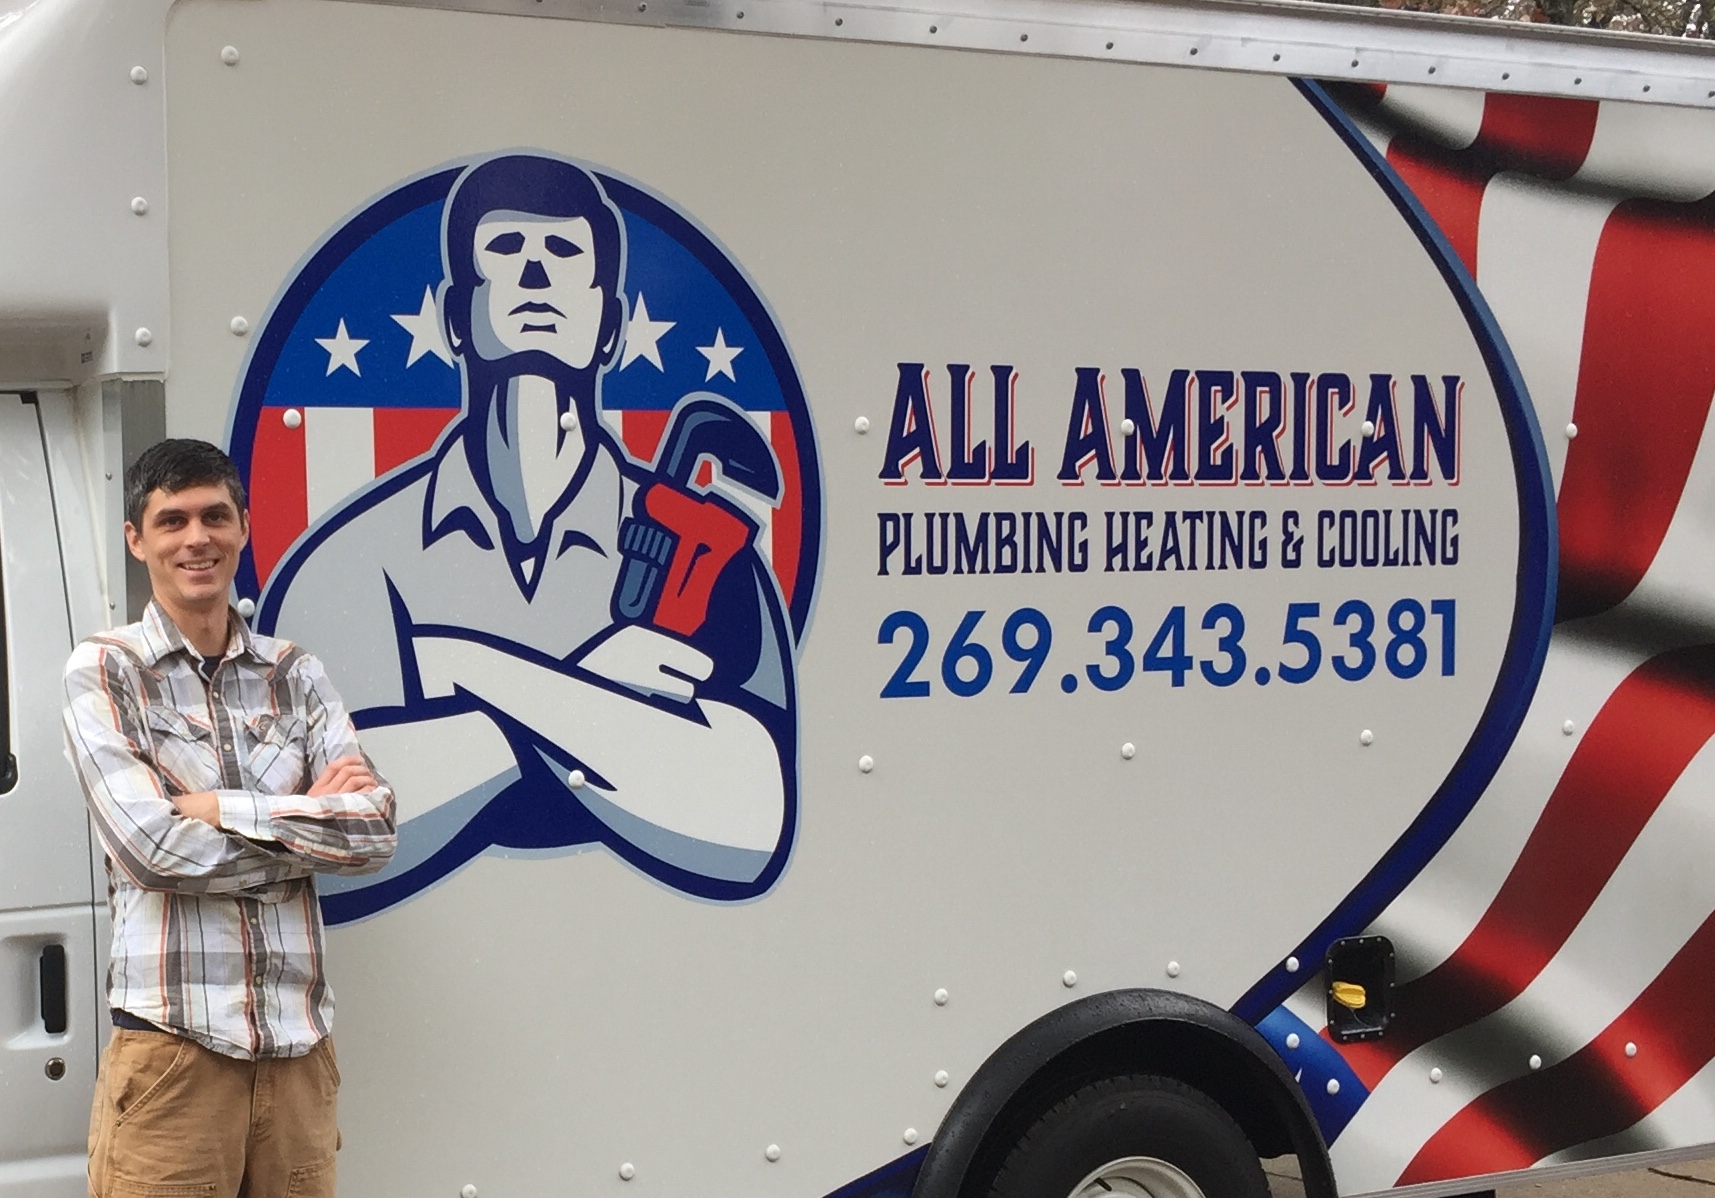 The owner of All American Plumbing Heating & Cooling posing in front of his truck